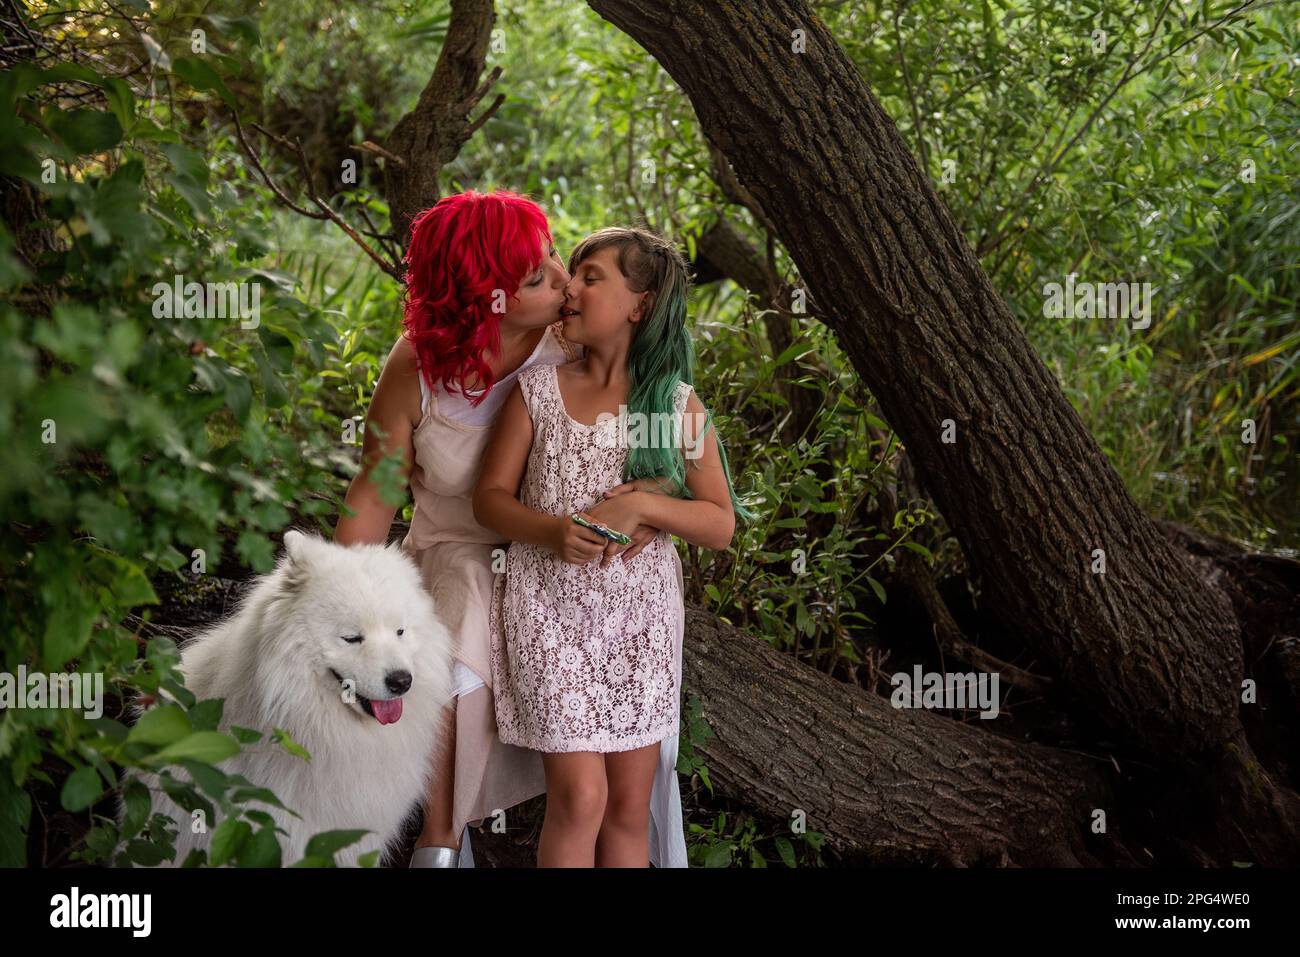 In the Green Forest, by small diversity stream, mother with pink hair embrace daughter. The white fluffy samoyed guards the family. Traveling with pet Stock Photo